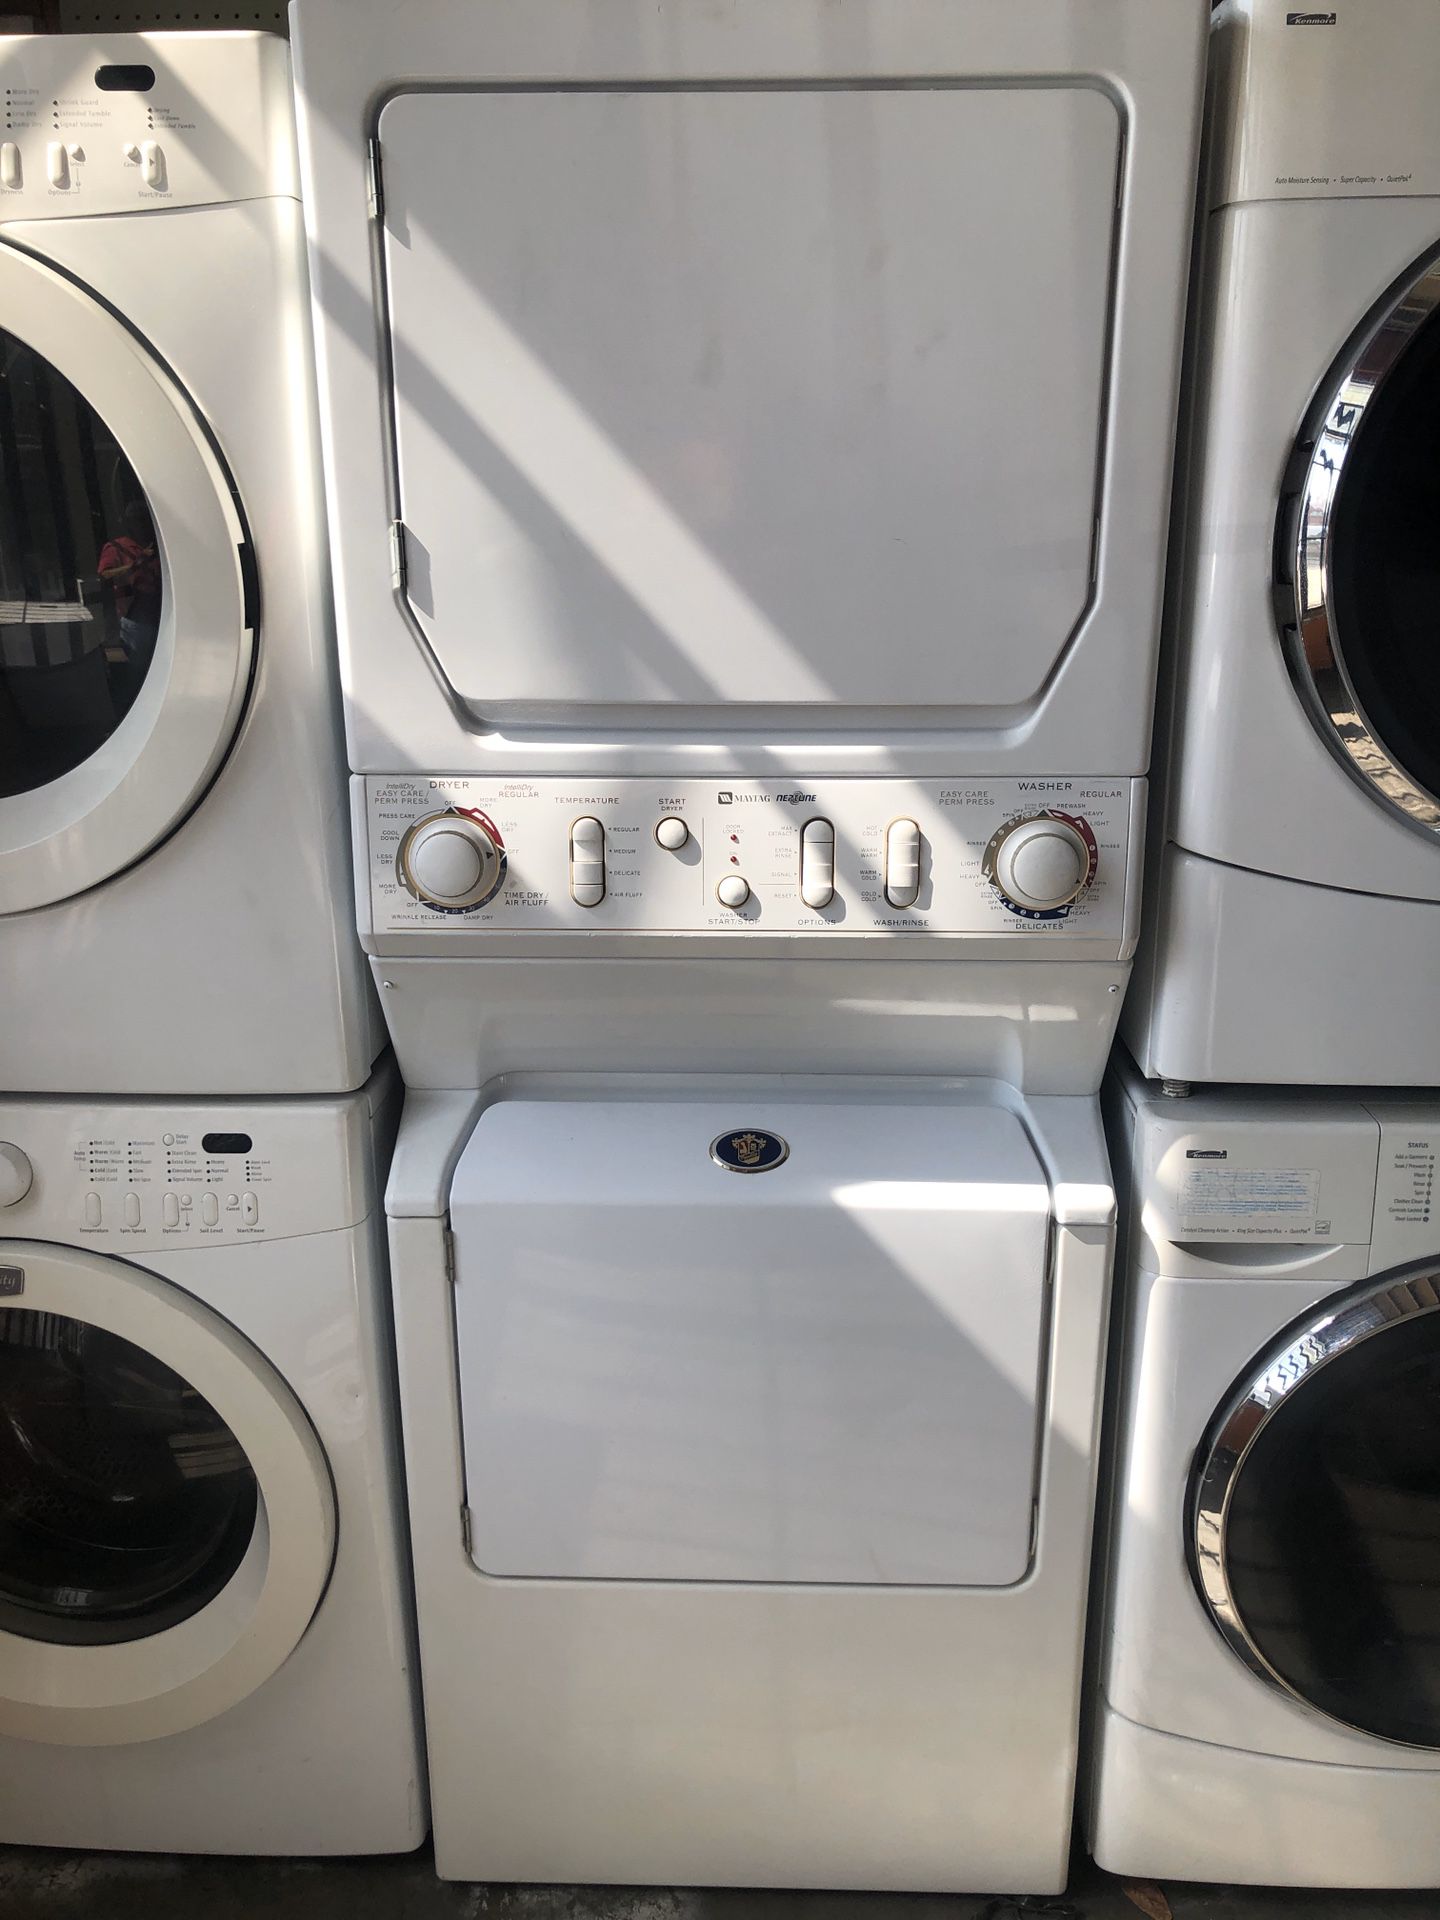 STACKED FRONT LOAD WASHER/GAS DRYER.